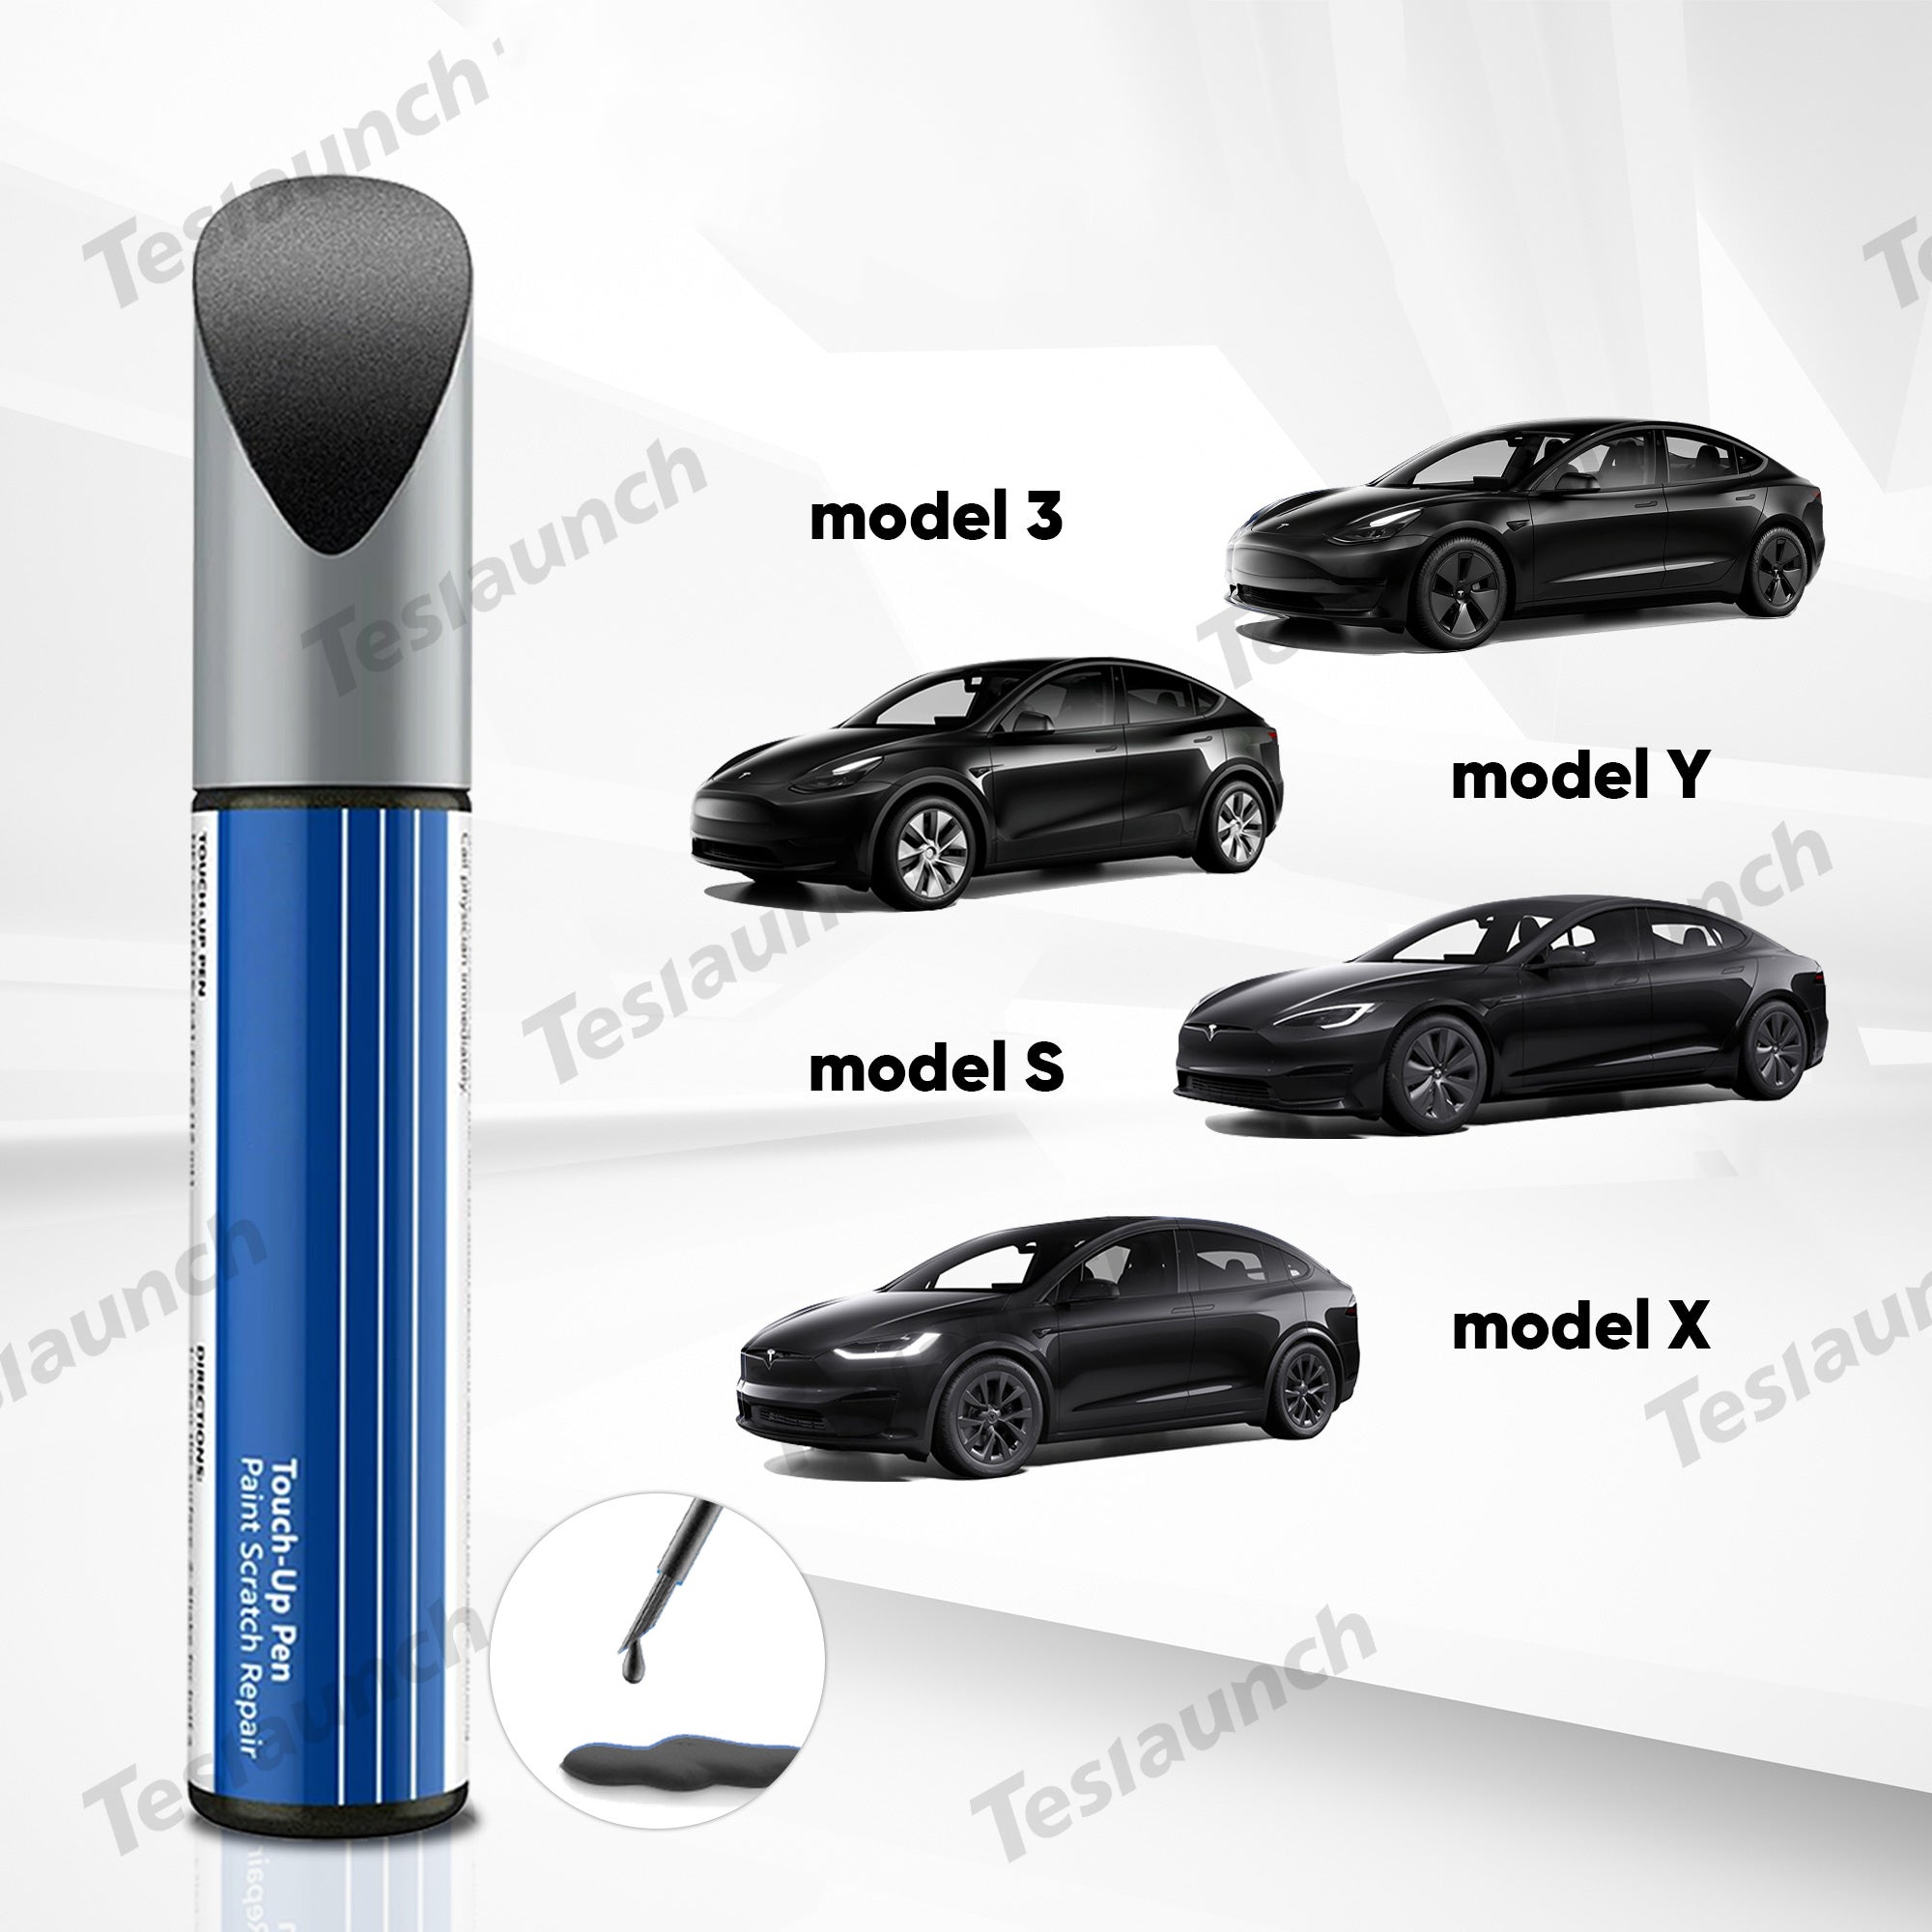 Tesla Pearl White PPSW Touch Up Paint & Scratch Repair Kit